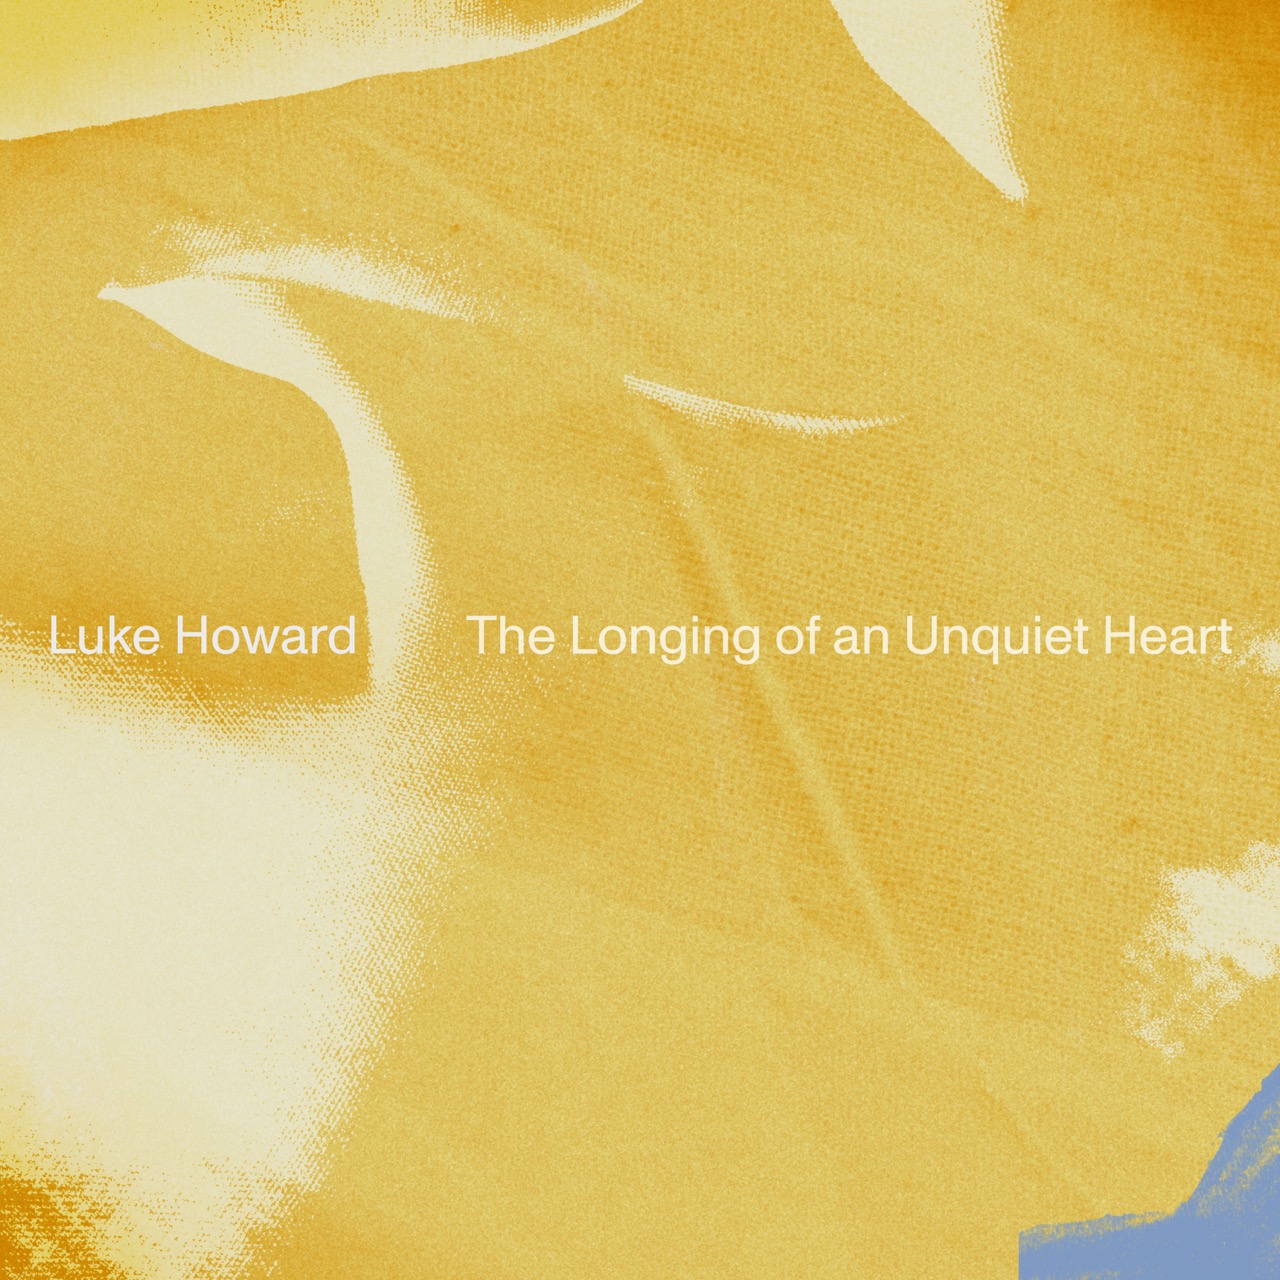 The Great Longing of an Unquiet Heart